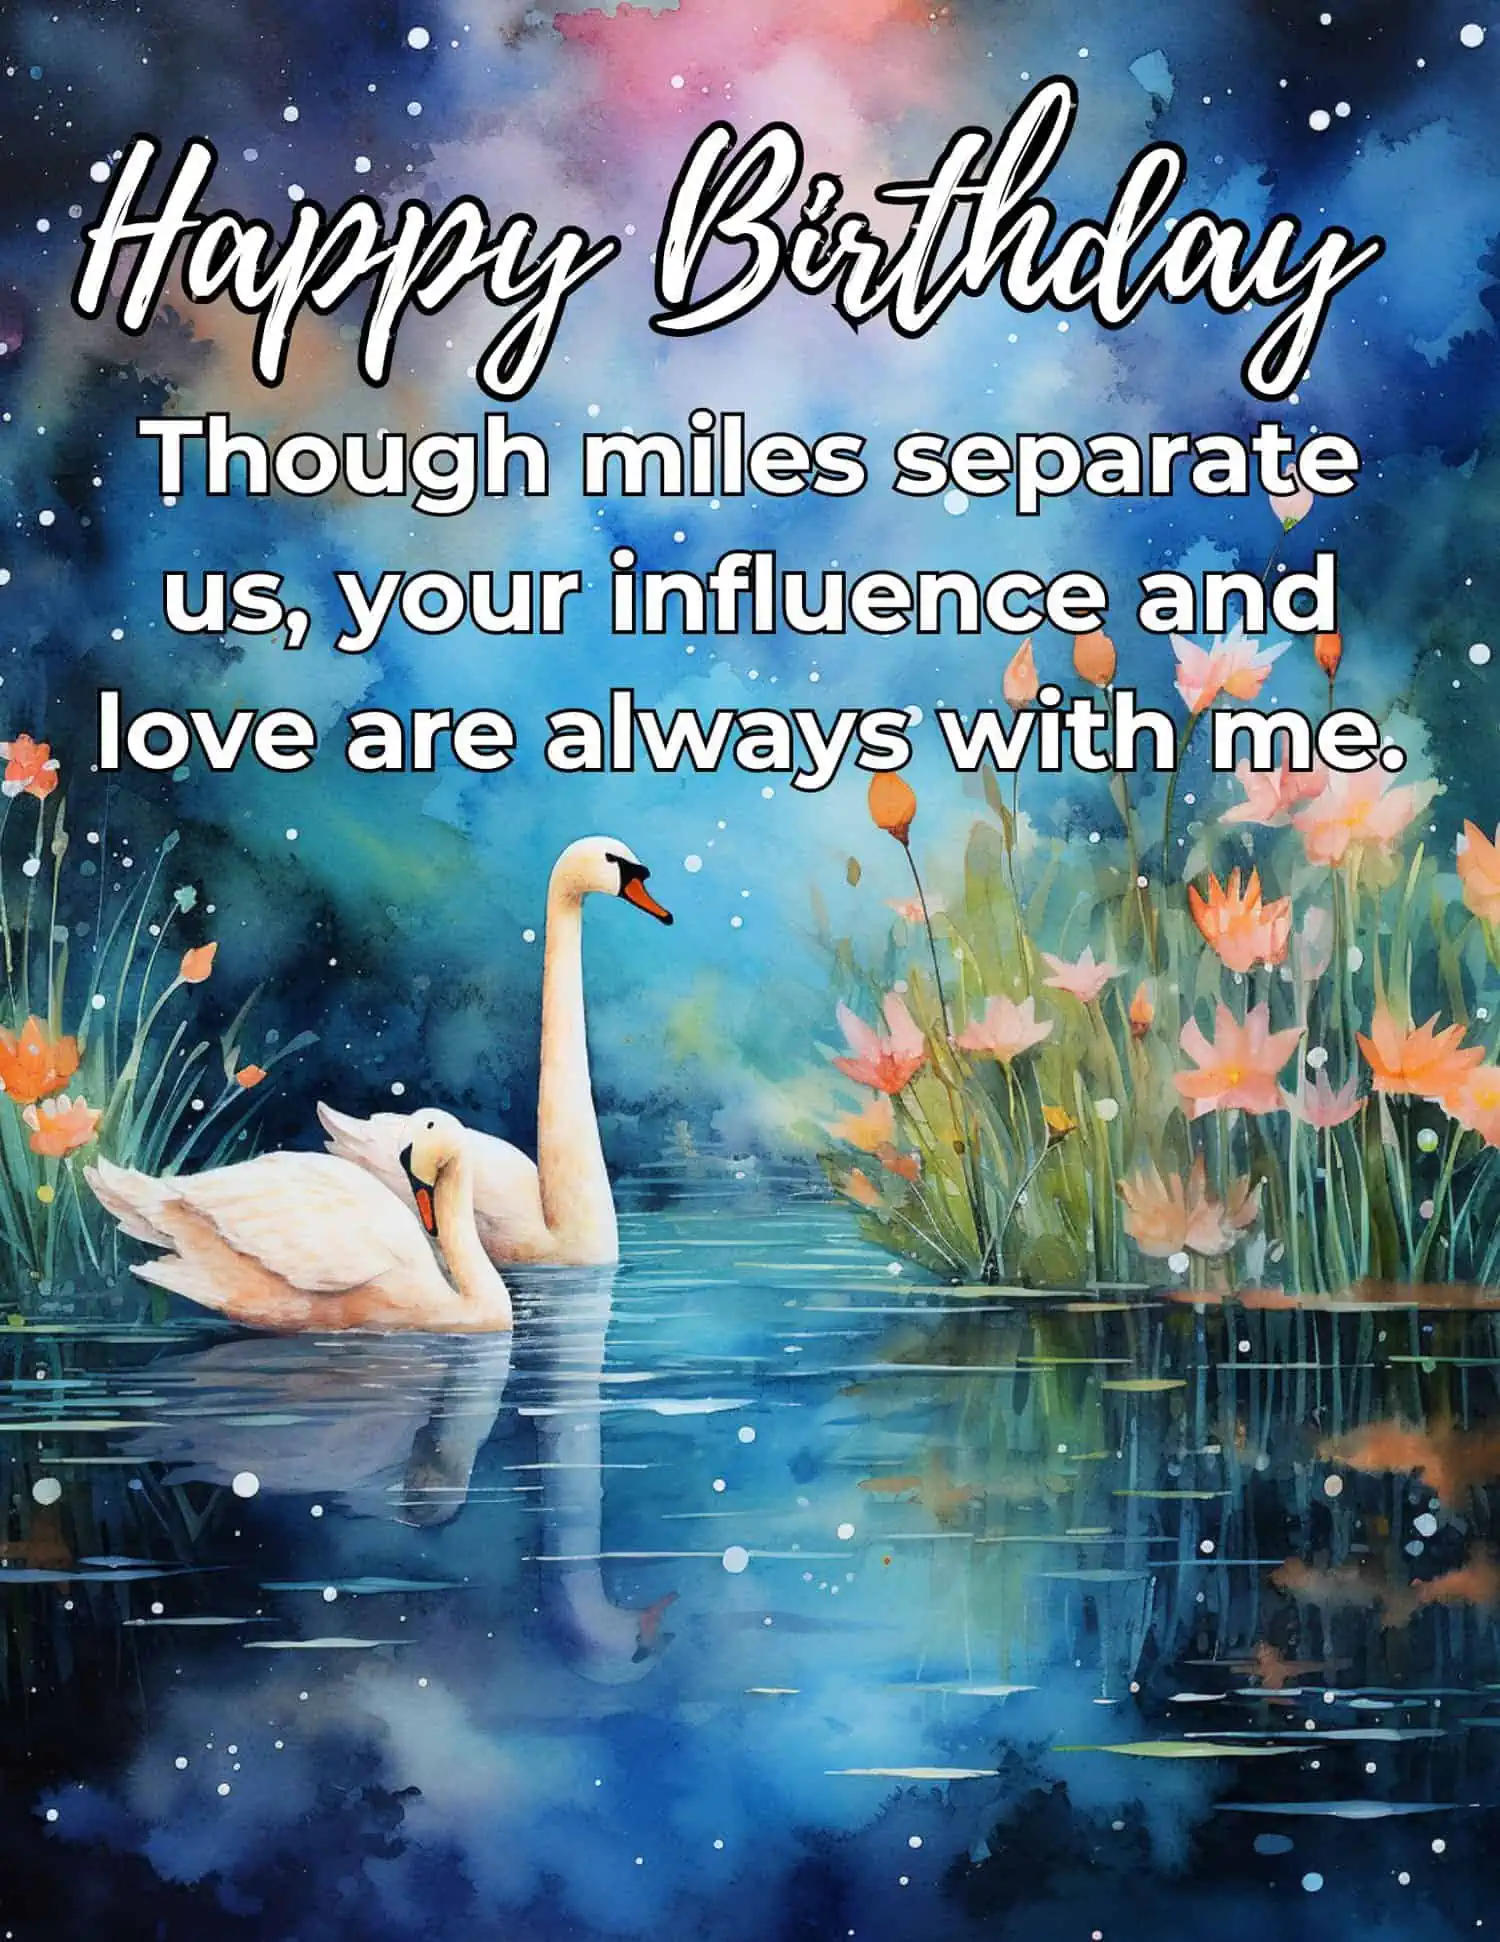 A thoughtful collection of birthday messages designed to connect hearts across the miles, perfect for uncles who are far away but always close in spirit.